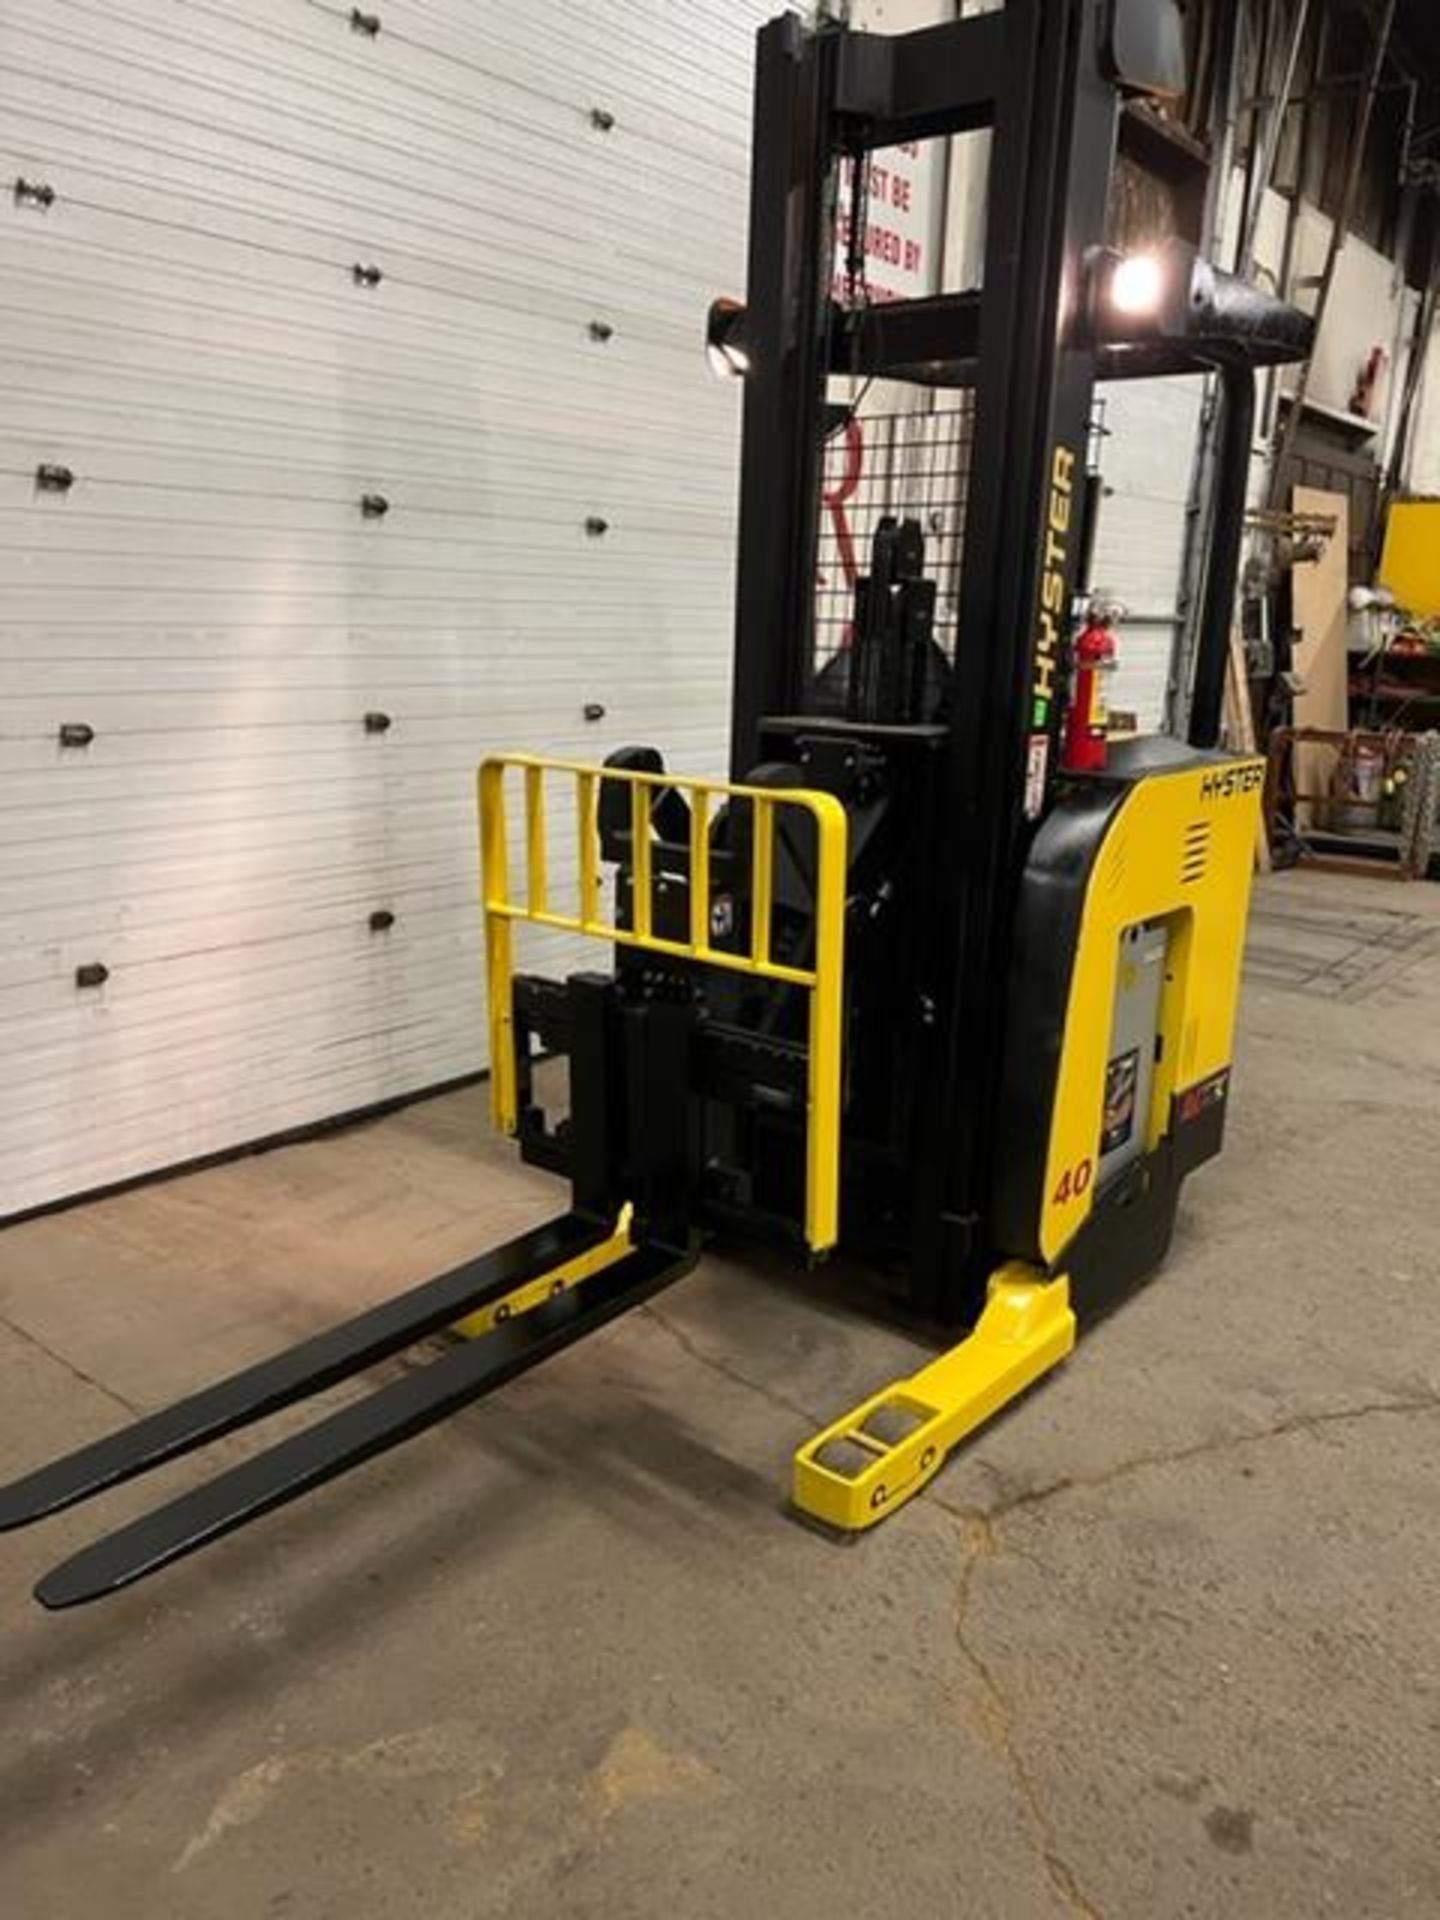 FREE CUSTOMS - 2011 Hyster Reach Truck Pallet Lifter REACH TRUCK 4000lbs capacity electric NICE - Image 2 of 3